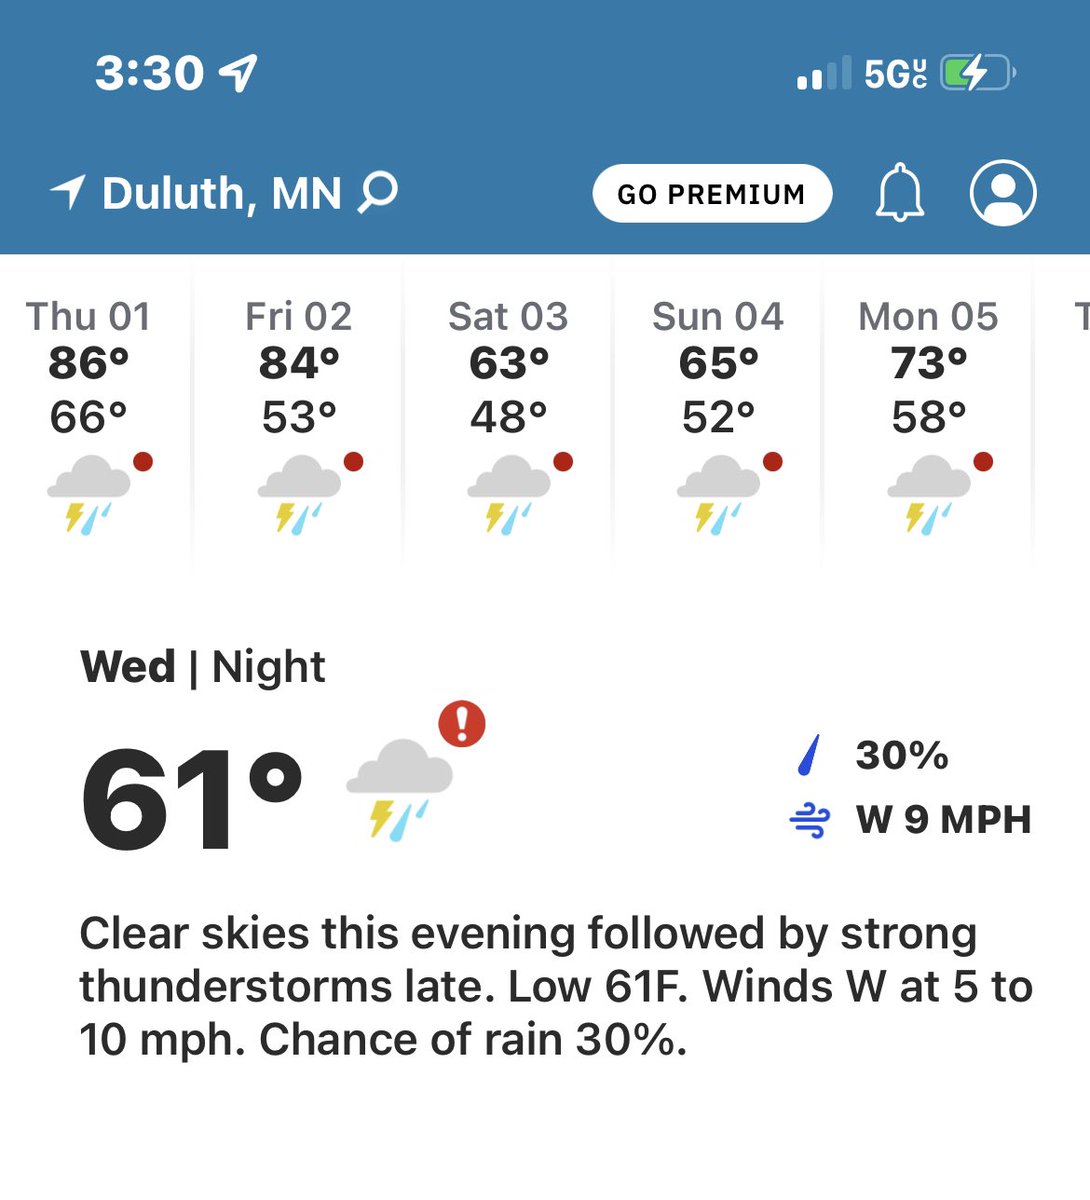 I’m hoping this is an error! Because rain and thunderstorms for a week and a half straight isn’t cool! #Weather #Minnesota #Duluth @weatherchannel @nwas @NWSduluth https://t.co/biG7ThQ8M0